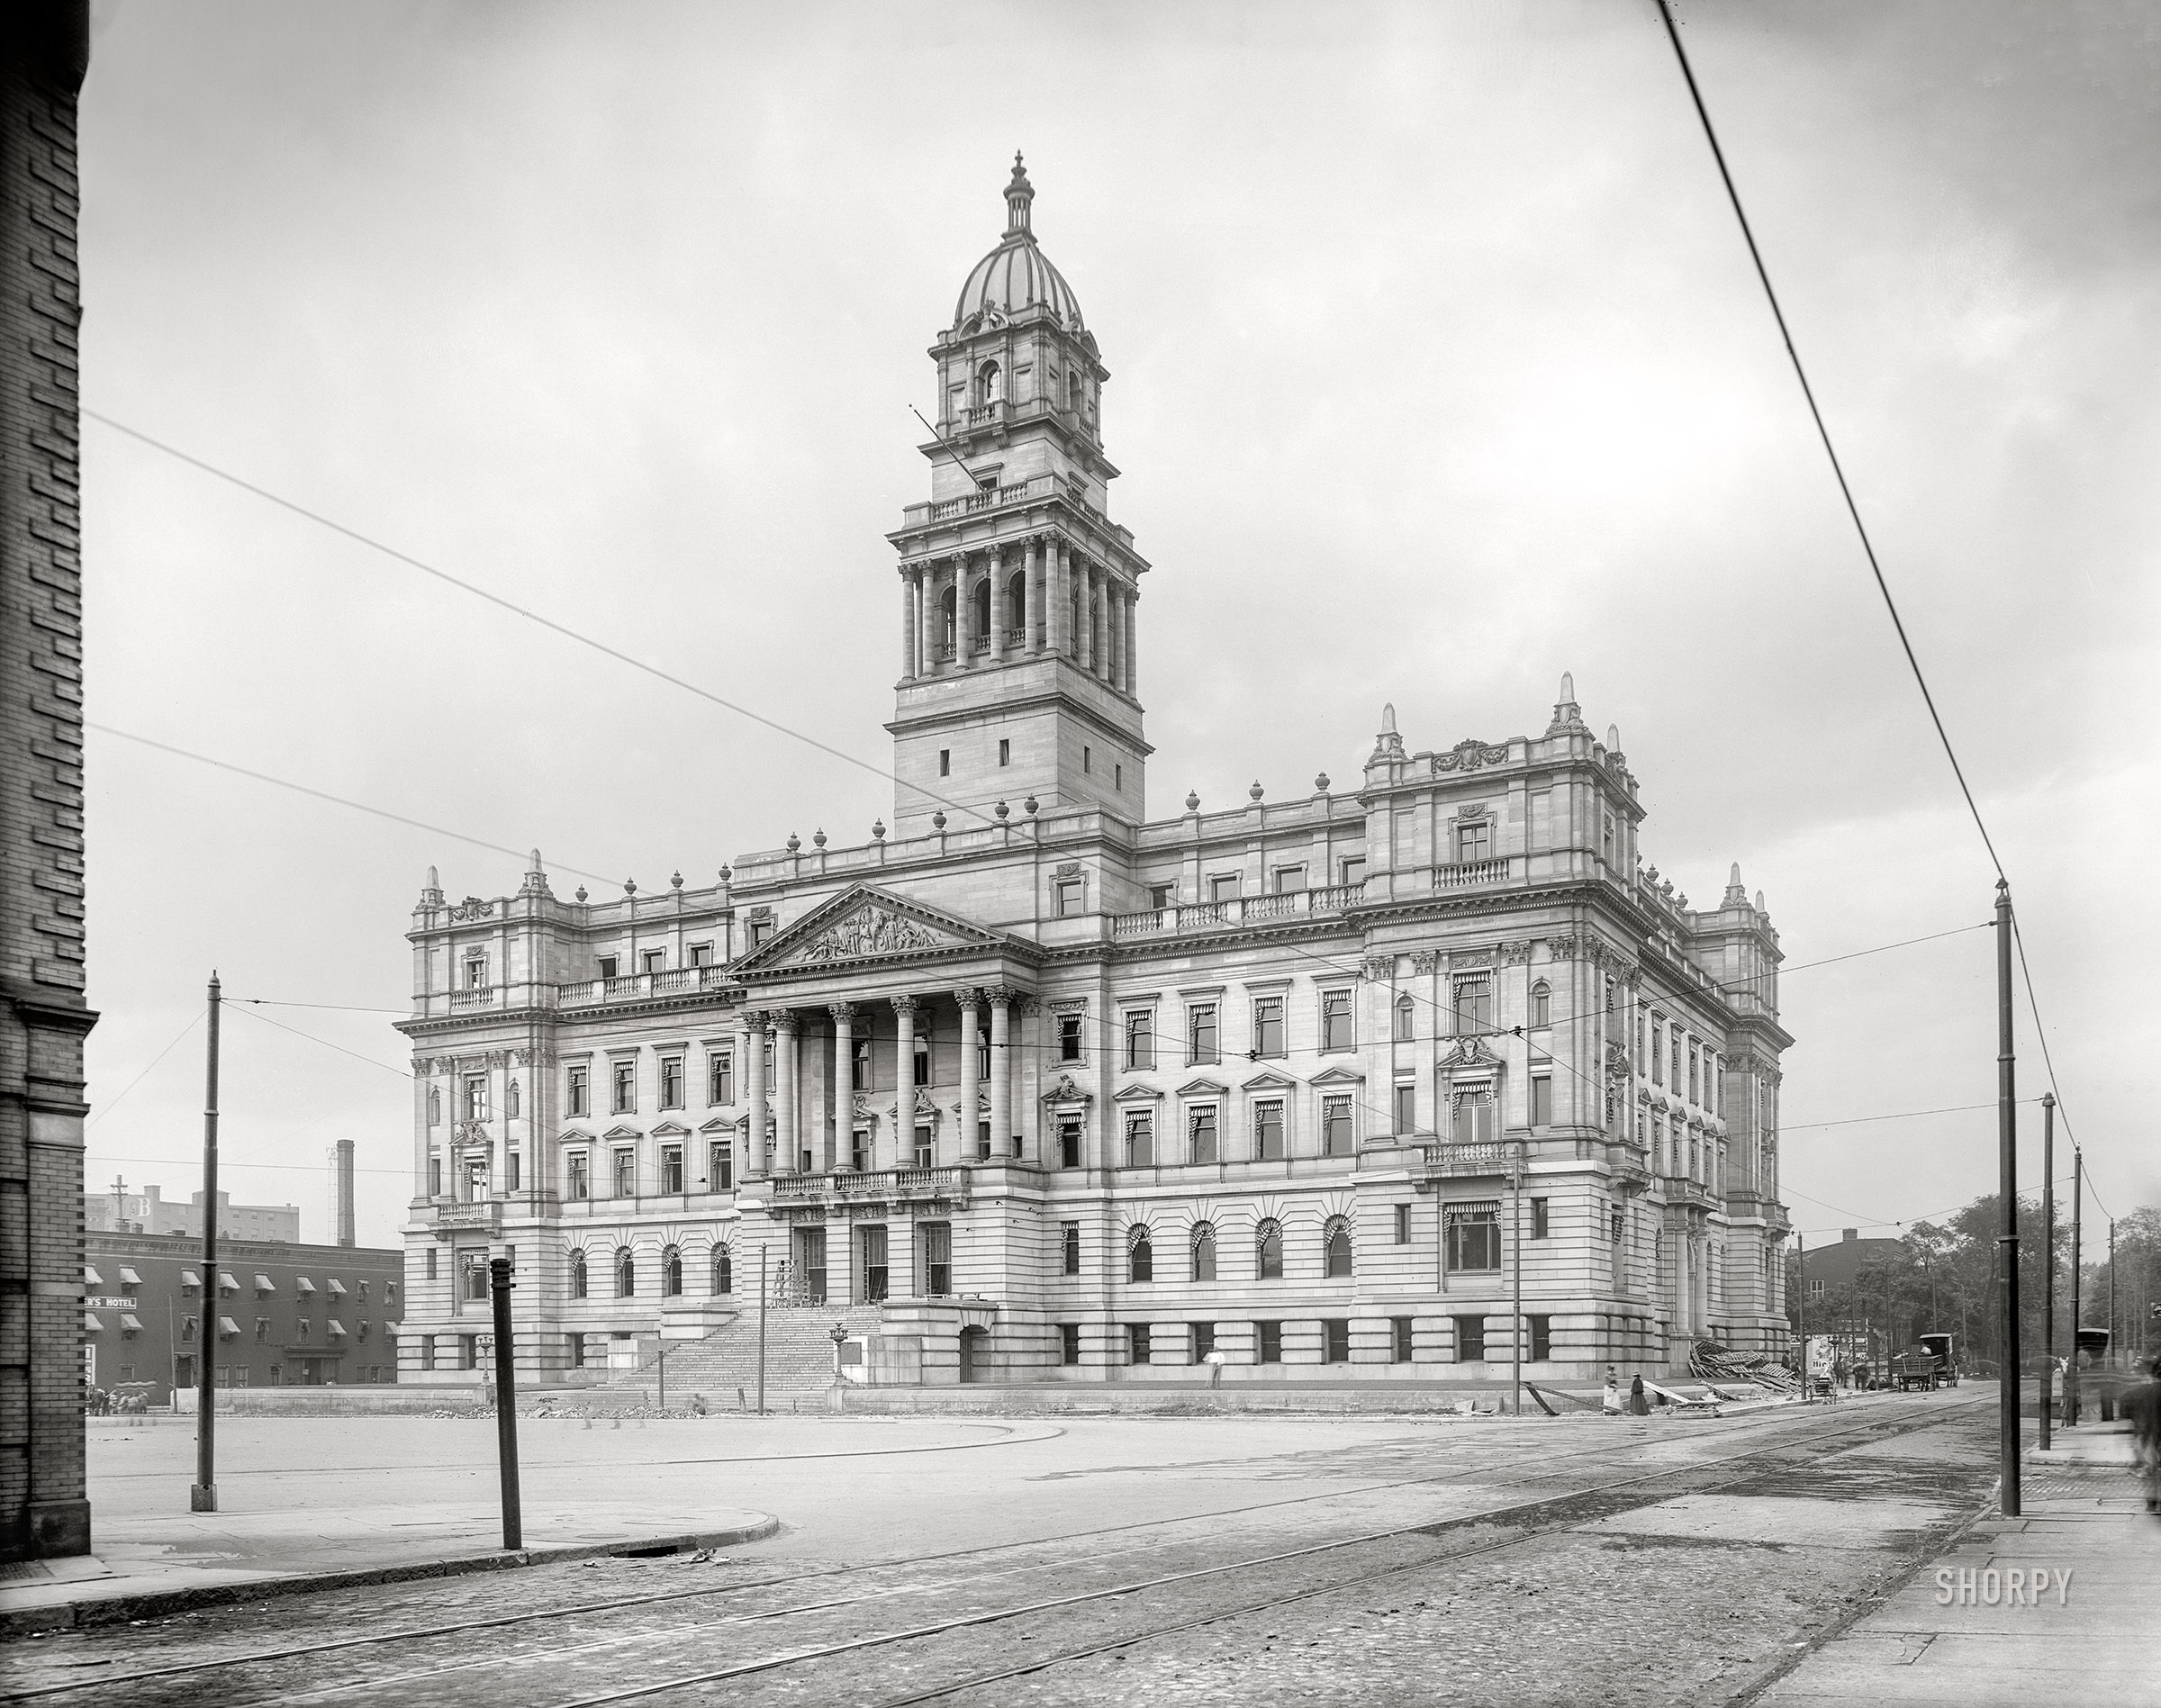 Detroit, Michigan, circa 1901. "Wayne County Building." This multi-layered municipal confection, completed in 1902, still stands as a monument to the wedding-cake school of architecture. 8x10 inch glass negative, Detroit Photographic Co. View full size.